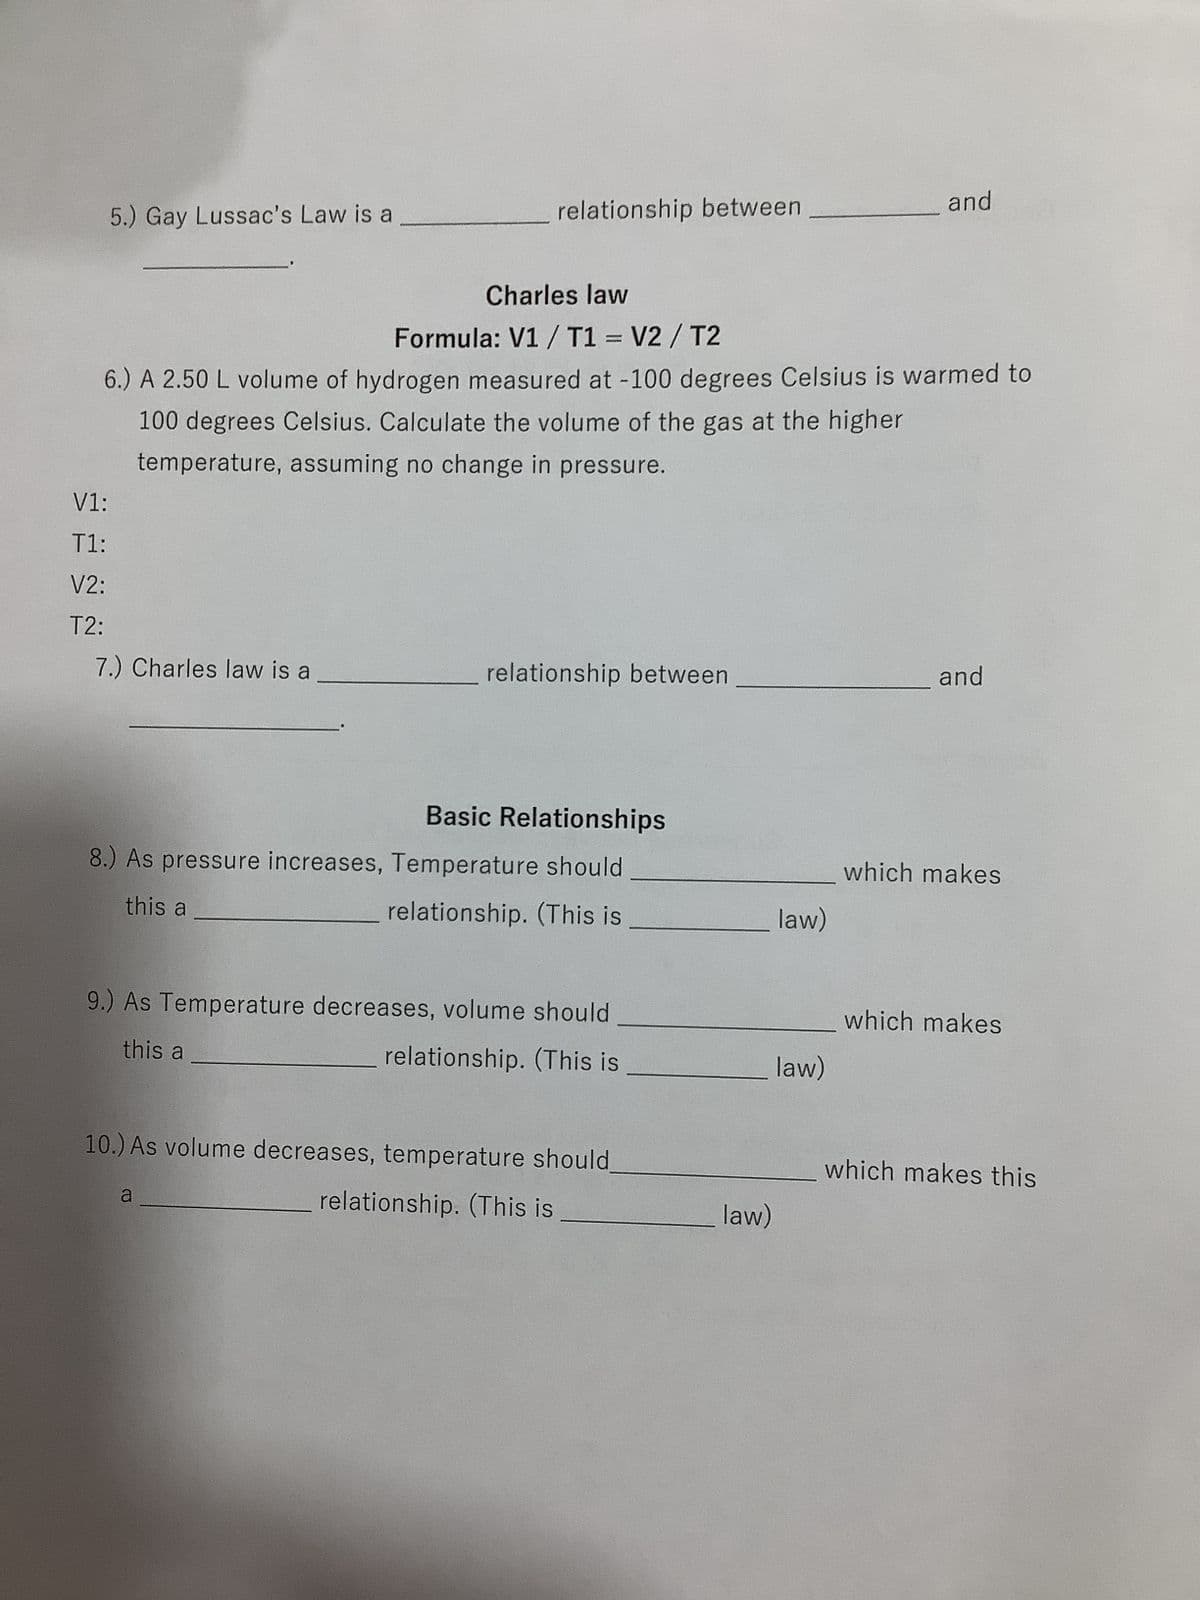 Gas Laws Practice Worksheet - Boyles, Gay lussacs, Charles
Boyles Law
Formula: P1V1 = P2V2
1.) A sample of oxygen had an initial volume of 4.0L and was at a standard
pressure of latm, what would the new volume be if the pressure was
increased to 25.00atm?
P1:
V1:
P2:
V2:
Boyles law is a
relationship between
Converting between Celsius and Kelvin
2.) Convert the following temperatures from ° C to K
a.) 30° C =
b.) 10° C =
c.) 4° C =
P1:
T1:
P2:
T2:
K
K
K
Name:
and
3.) The most important thing to remember when working Gas law problems
involving temperature is to convert from
Gay Lussac's Law
Formula: P1 / T1 = P2/T2
4.) 5.00 L of a gas is collected at 22.0° C and 745.0 mmHg. When the
temperature increases to 35° C what is the new pressure?
to